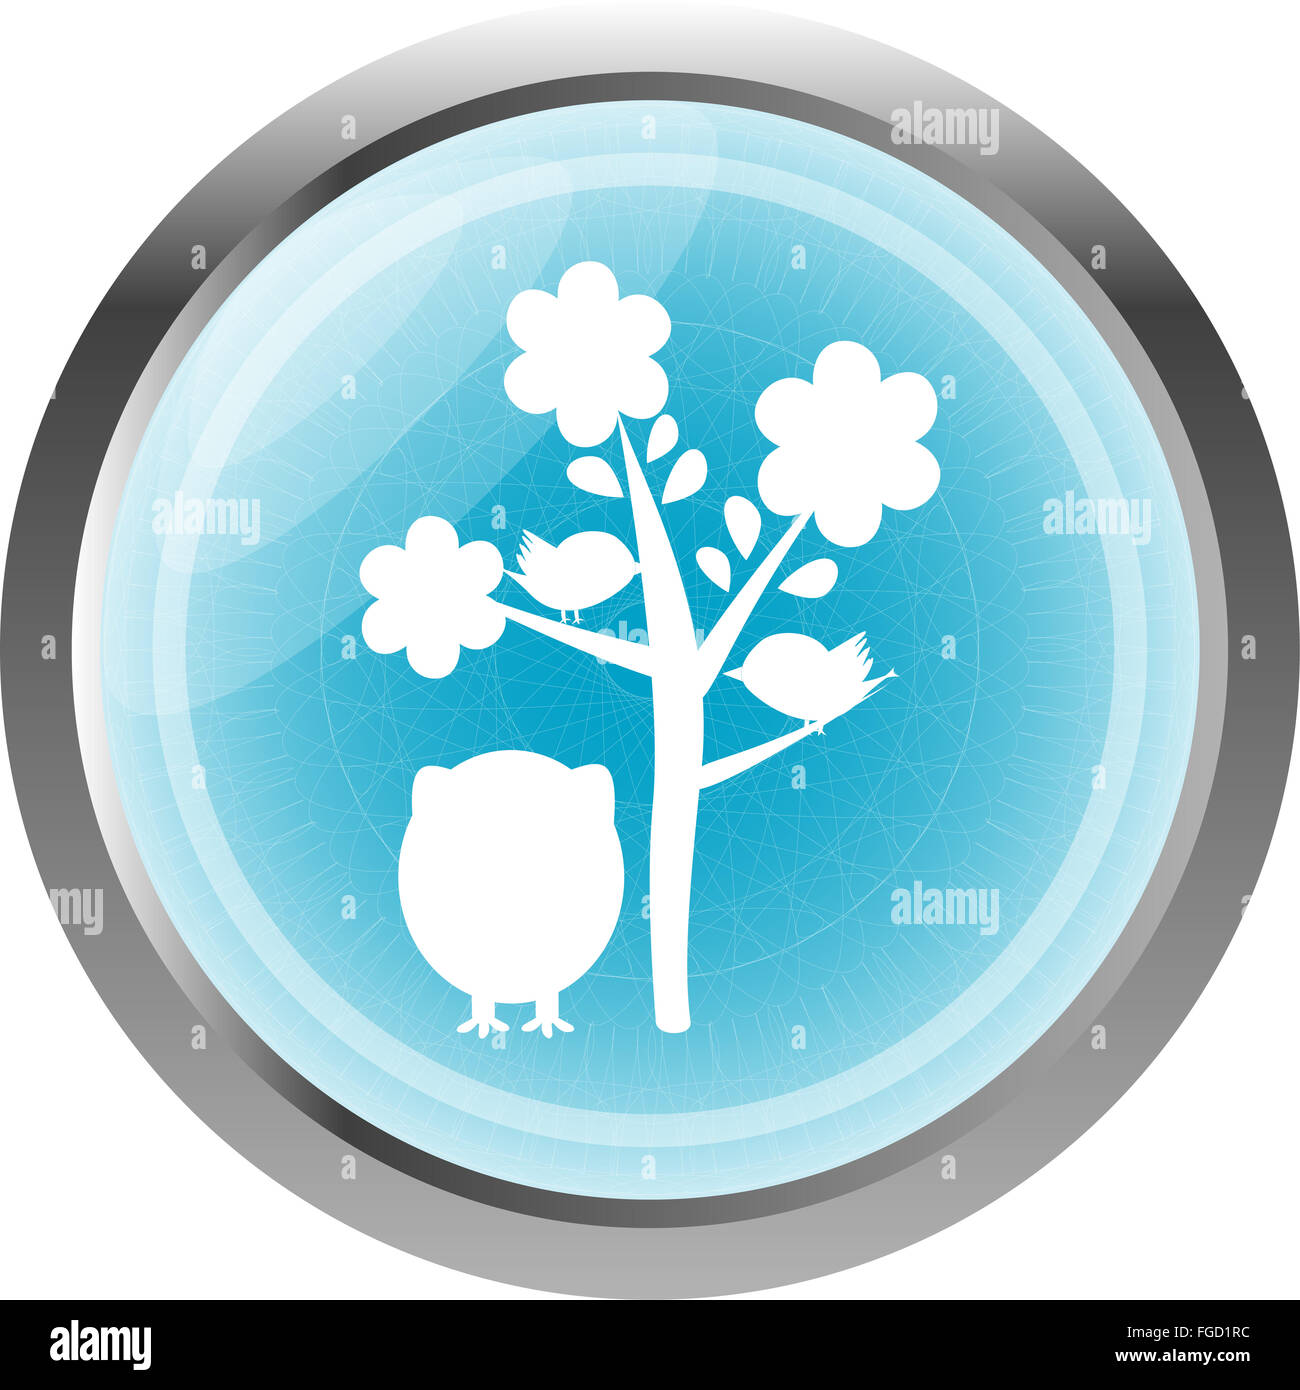 button with owl and tree, isolated on white Stock Photo